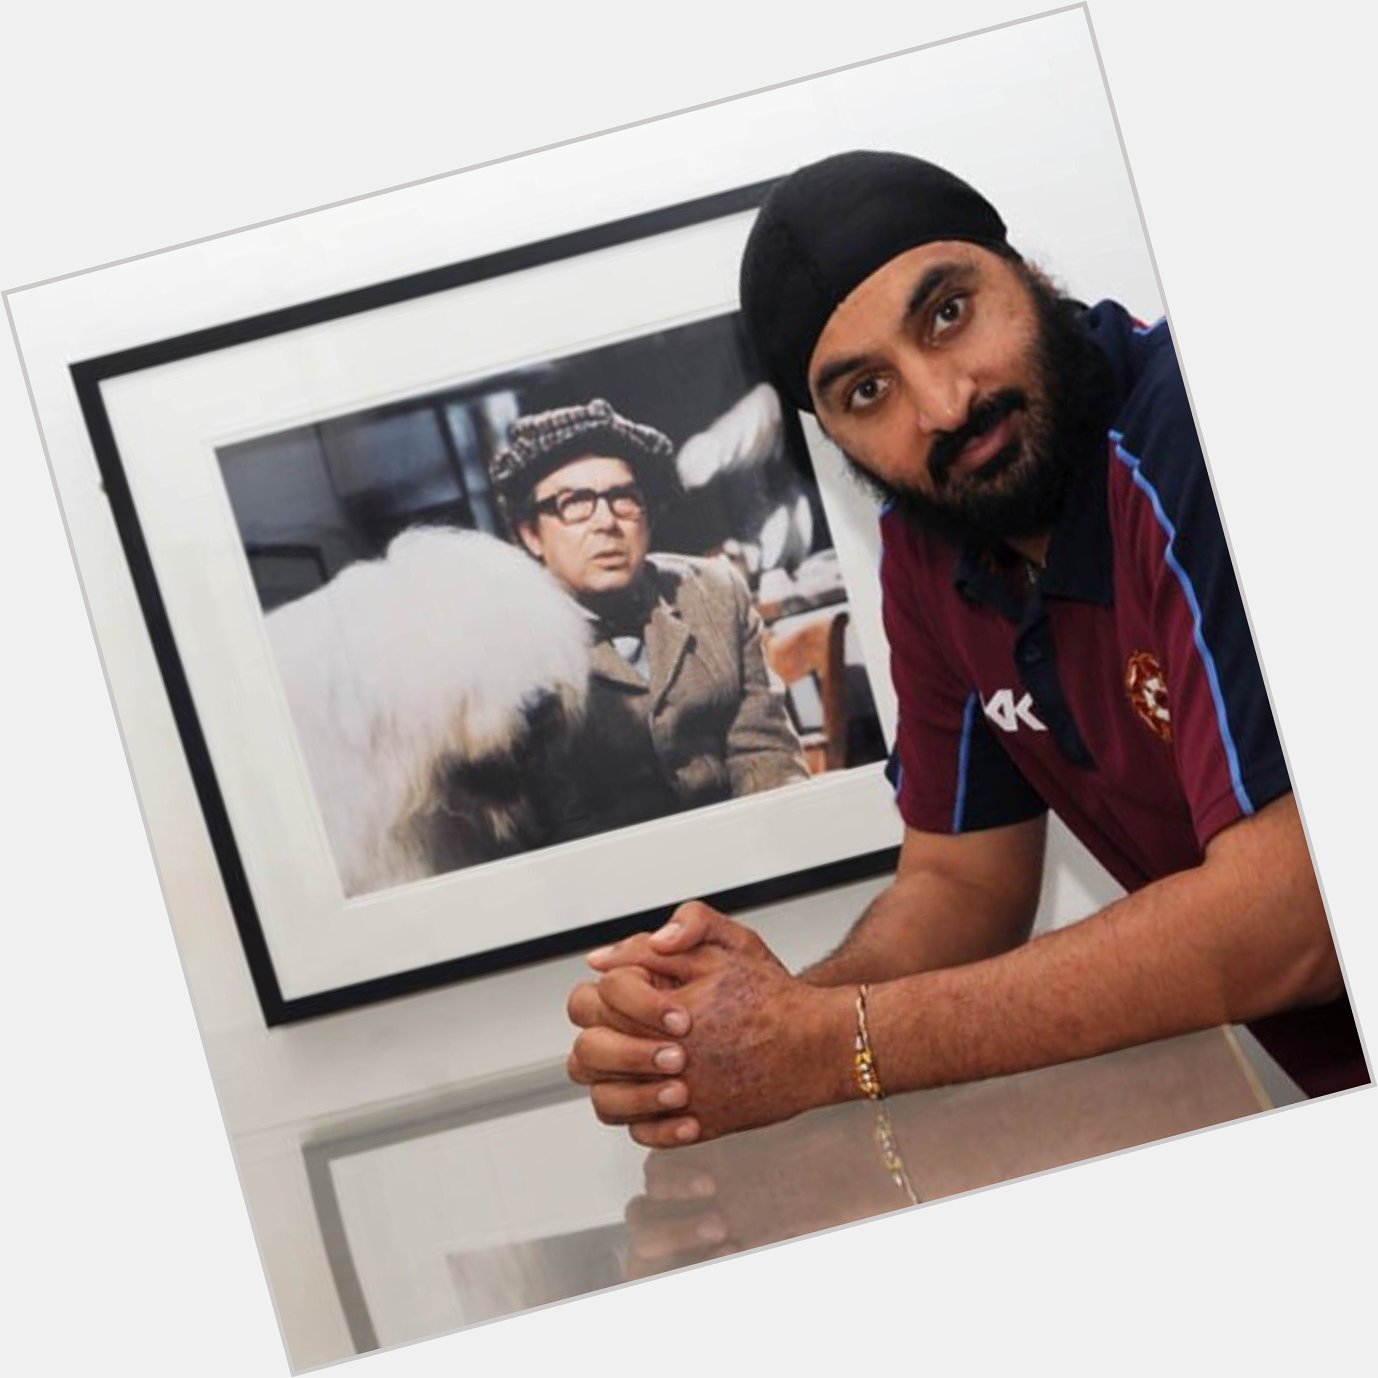 Happy birthday to fan Monty Panesar, the Luton-born former England Test cricketer, who is 37 today. 